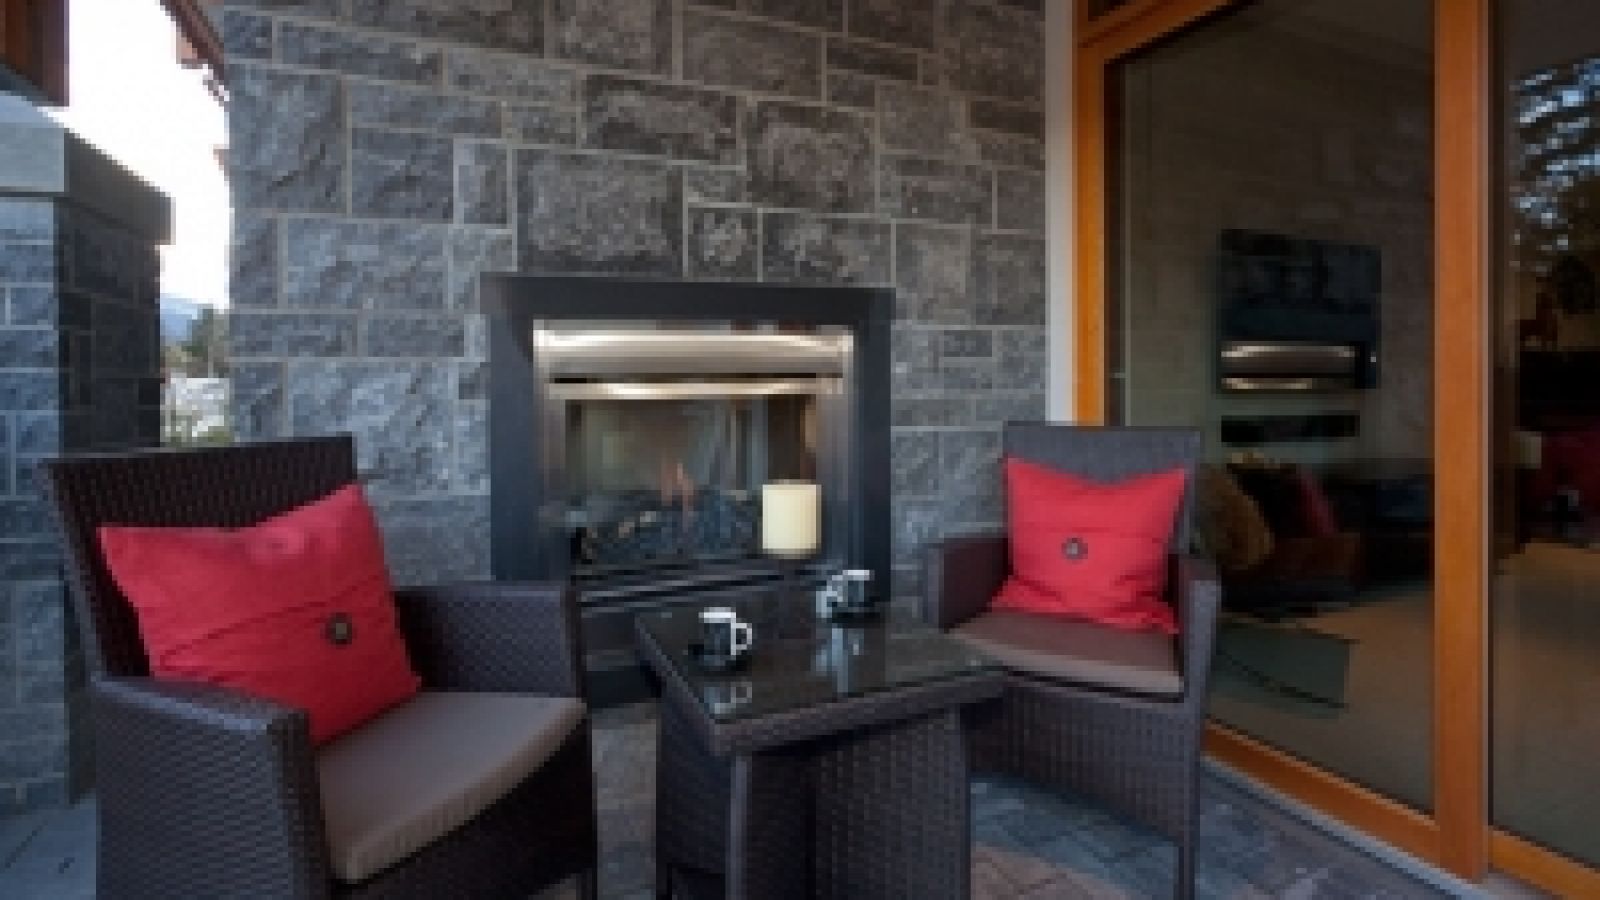 Fitzsimmons Walk Luxury Rental Homes - Whistler golf packages